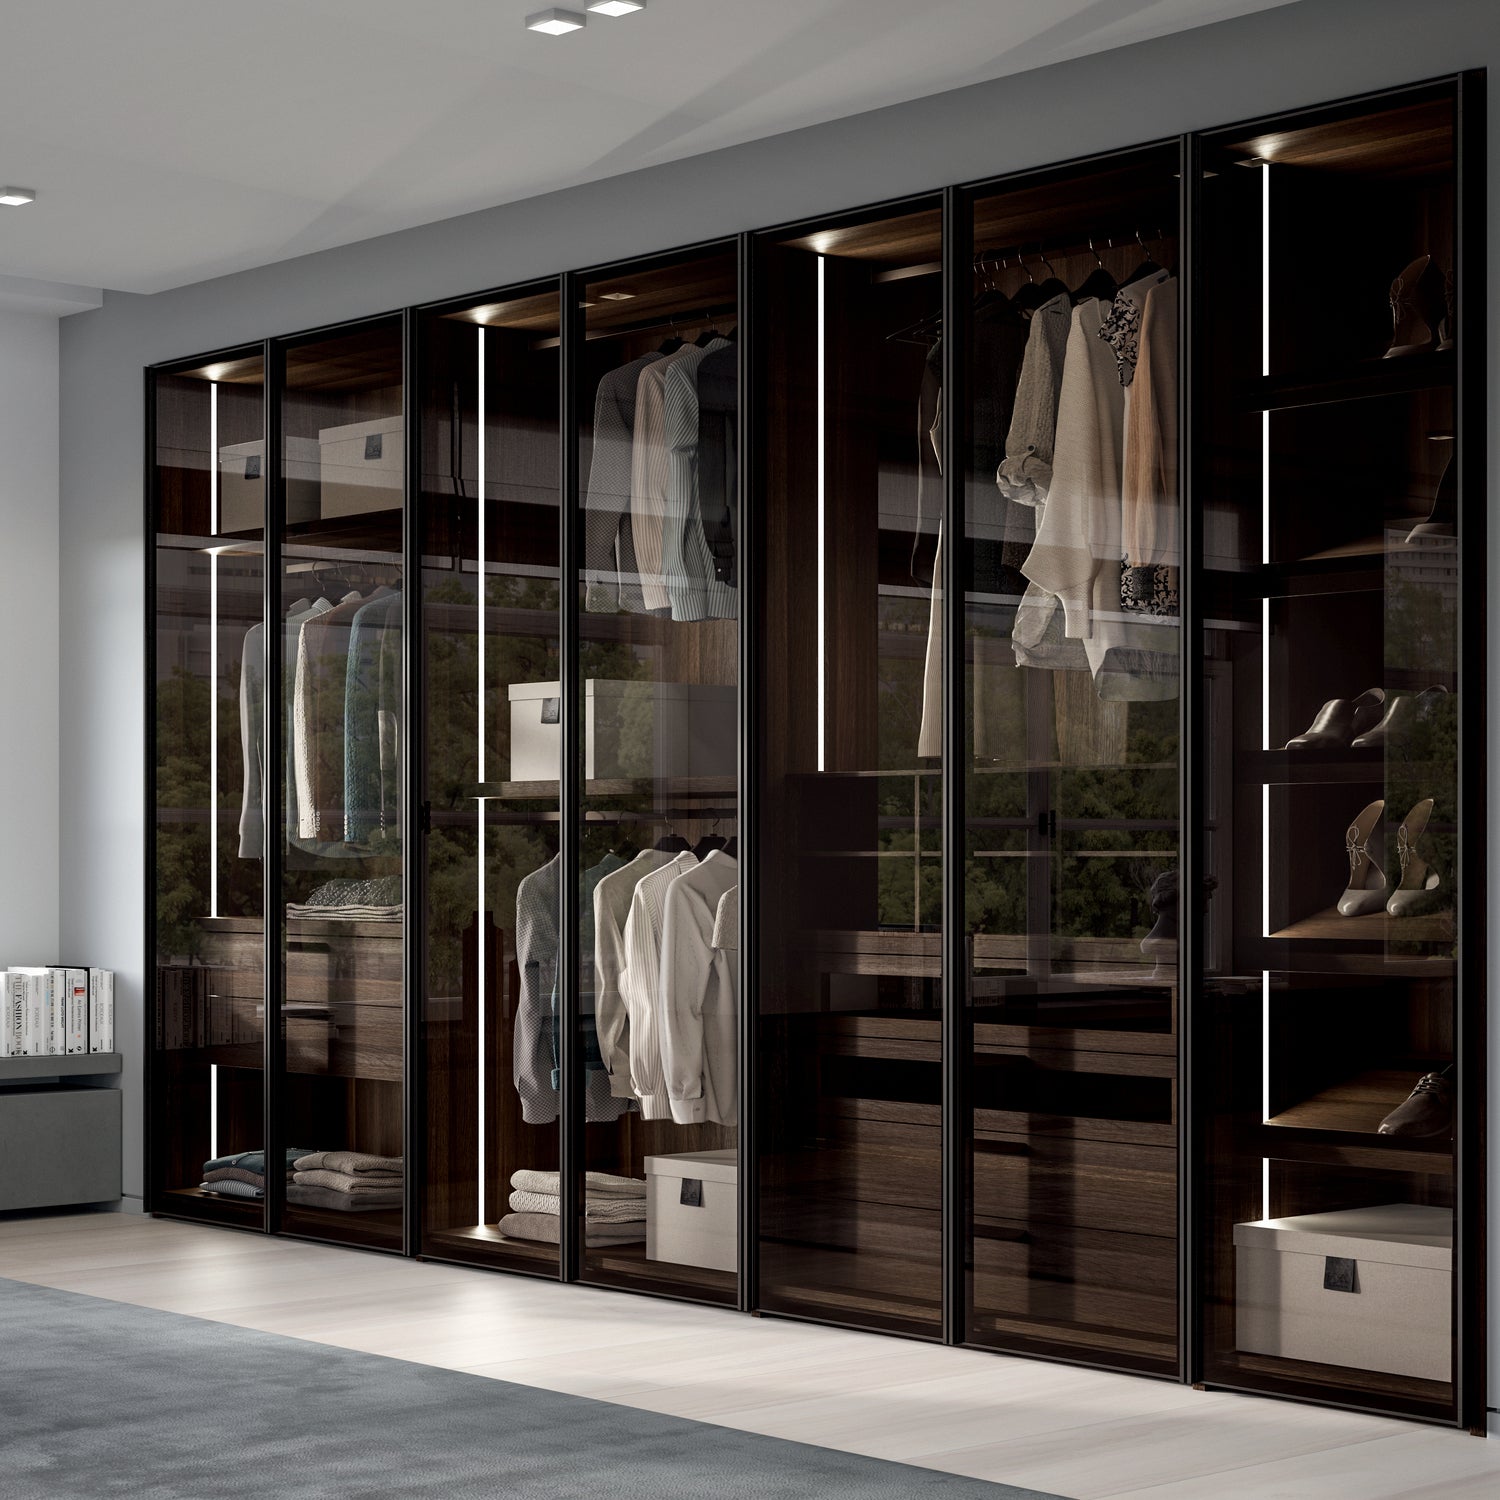 Emotion Up Wardrobe with Glass Up Hinged Doors